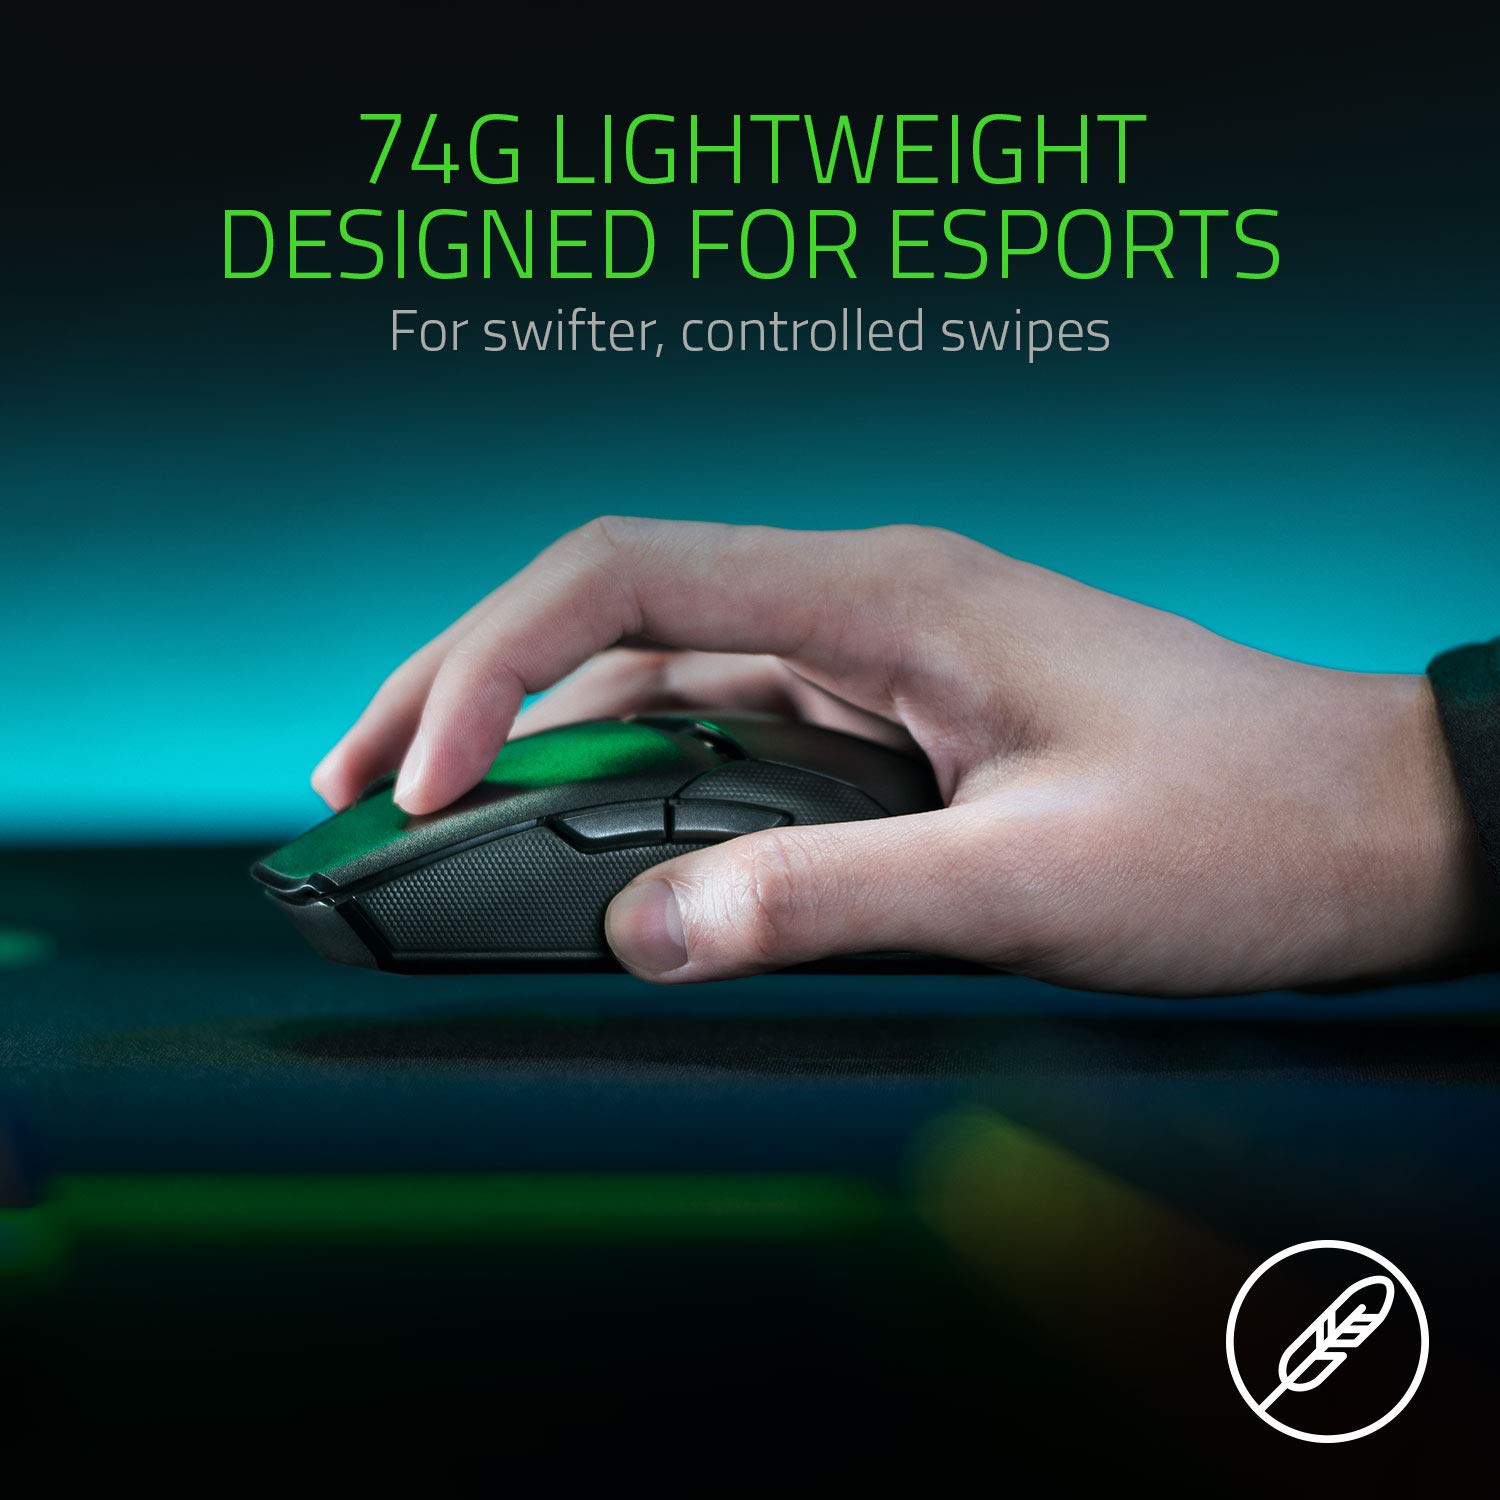 Razer Viper Ultimate Lightweight Wireless Gaming Mouse & RGB Charging Dock: Fastest Gaming Switches - 20K DPI Optical Sensor - Chroma Lighting - 8 Programmable Buttons - 70 Hr Battery - Classic Black - image 4 of 7